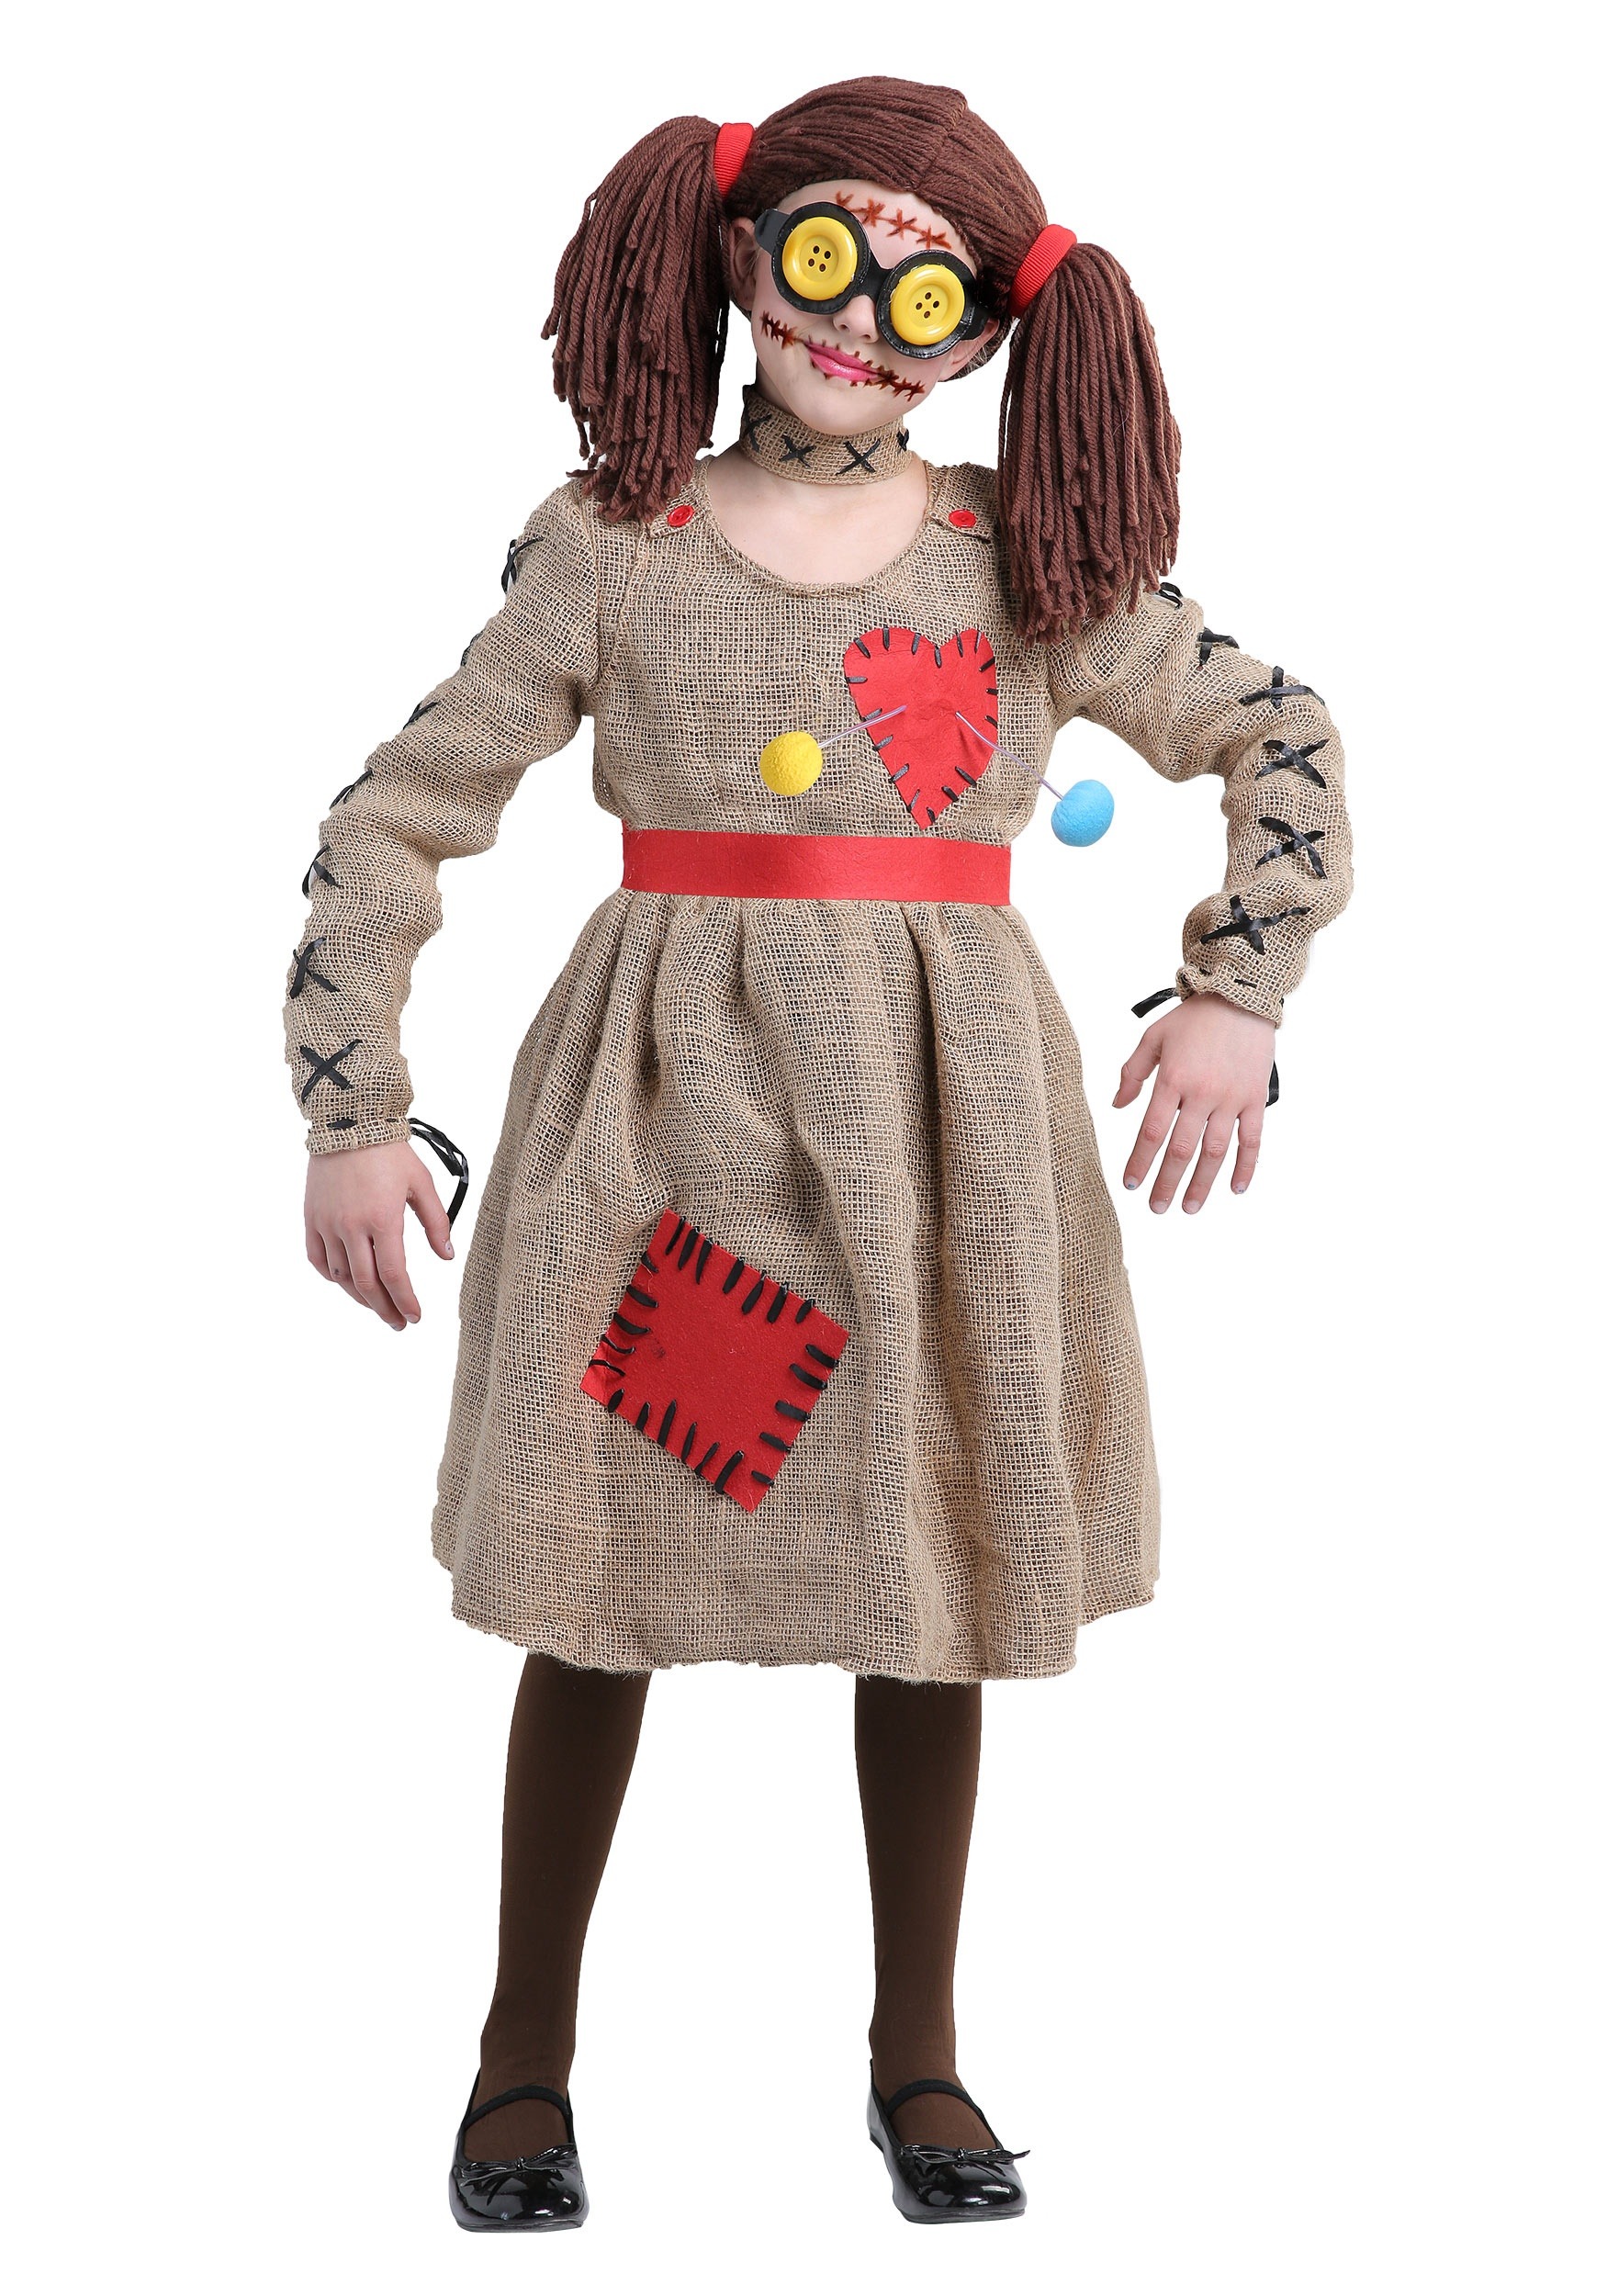 Photos - Fancy Dress FUN Costumes Voodoo Doll Burlap Costume for Girls Red/Beige FUN3123CH